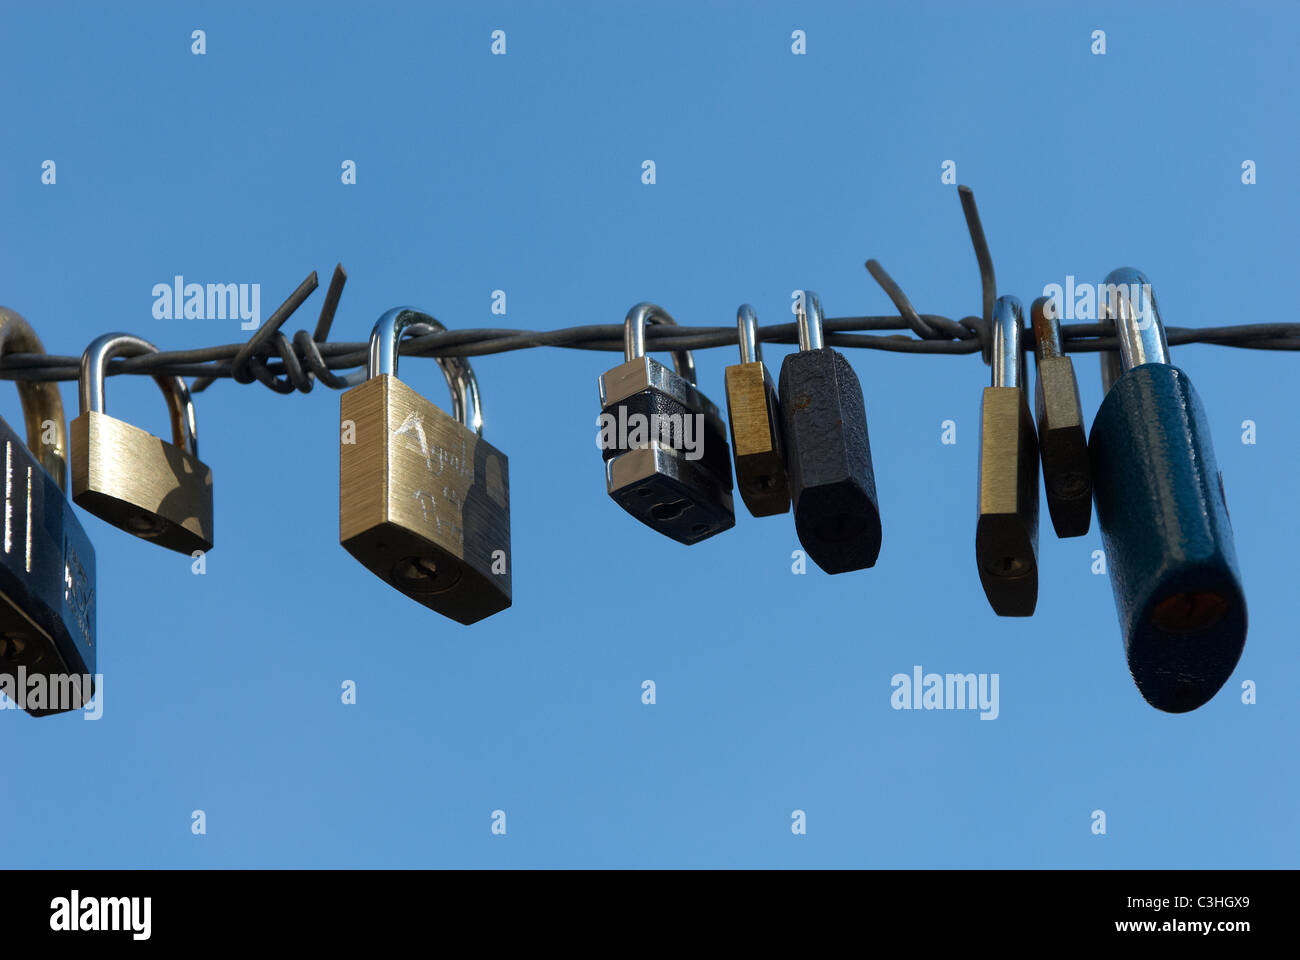 padlocks with heart shape attached to wire fence with blue sky background Stock Photo